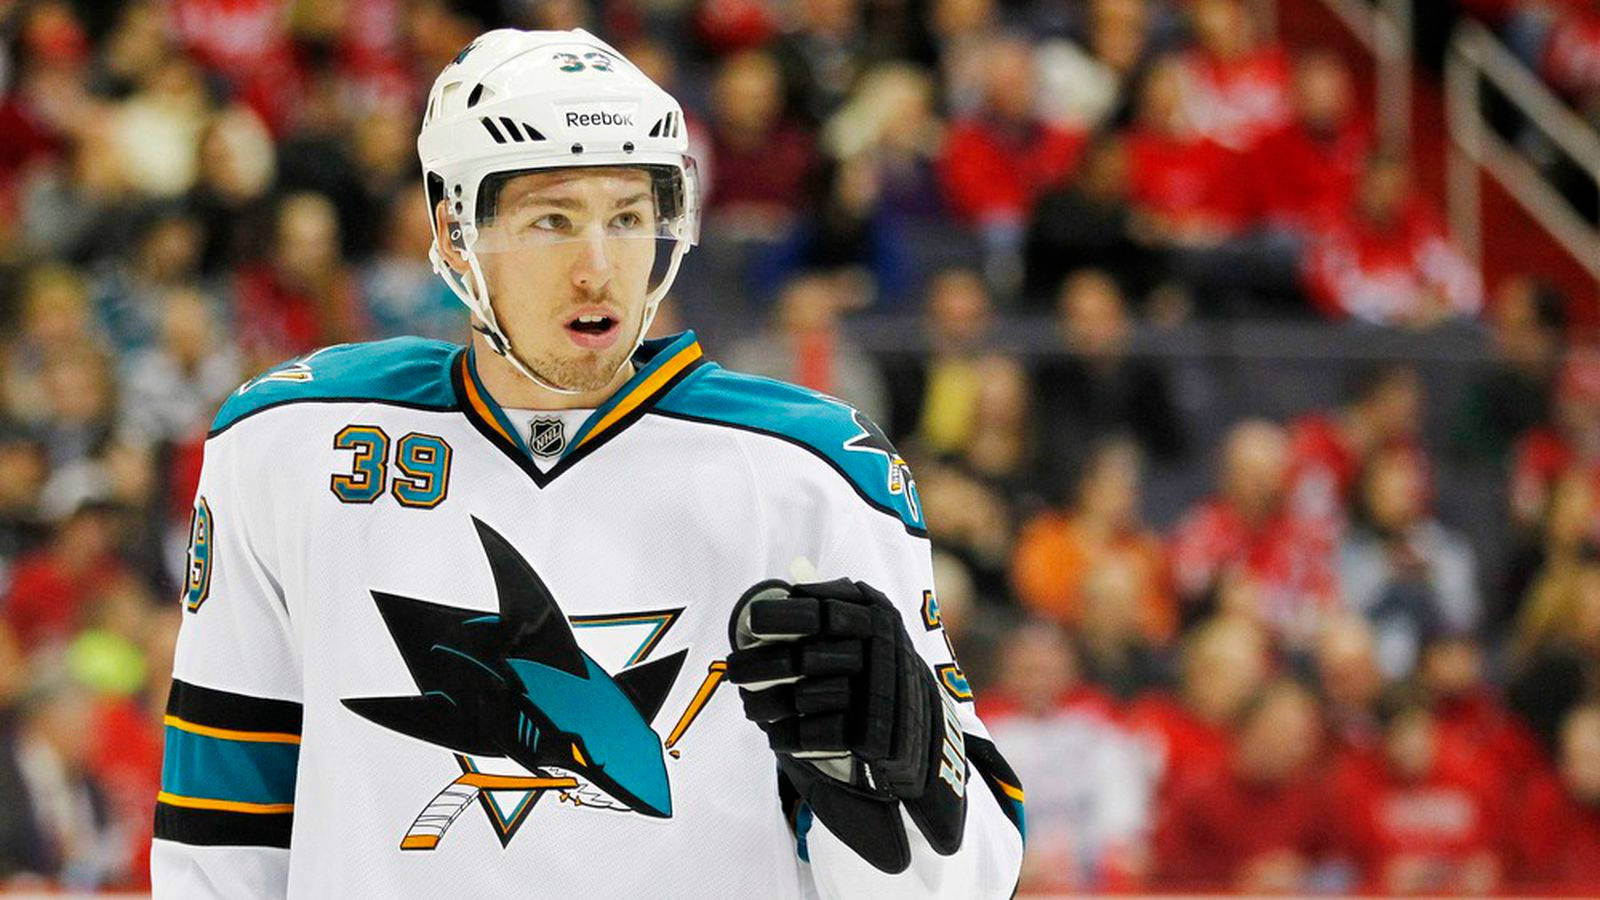 Canadisk professionel ishockeycenter Logan Couture Jersey tapet Wallpaper